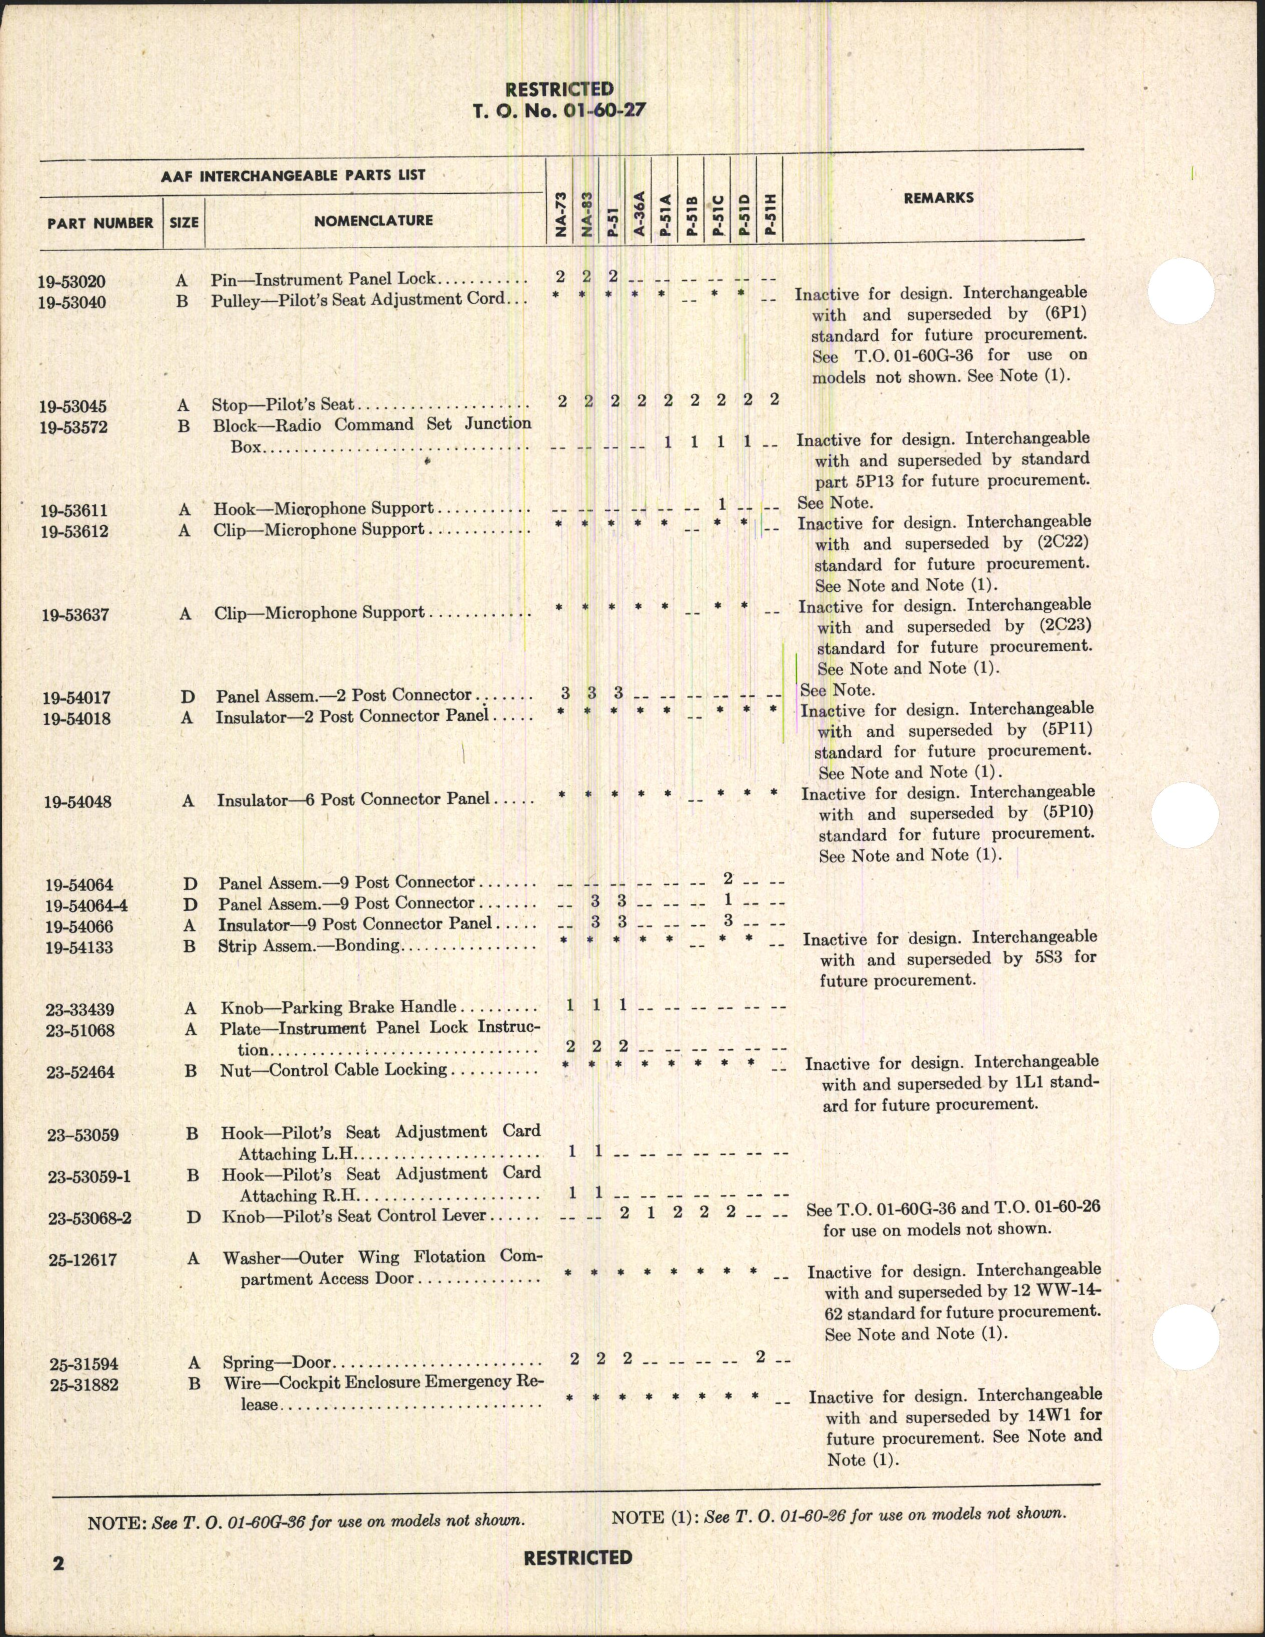 Sample page 6 from AirCorps Library document: Interchangeable Parts List for A-36A, P-51 Series, and Mustang I, IA, II, III, and IV